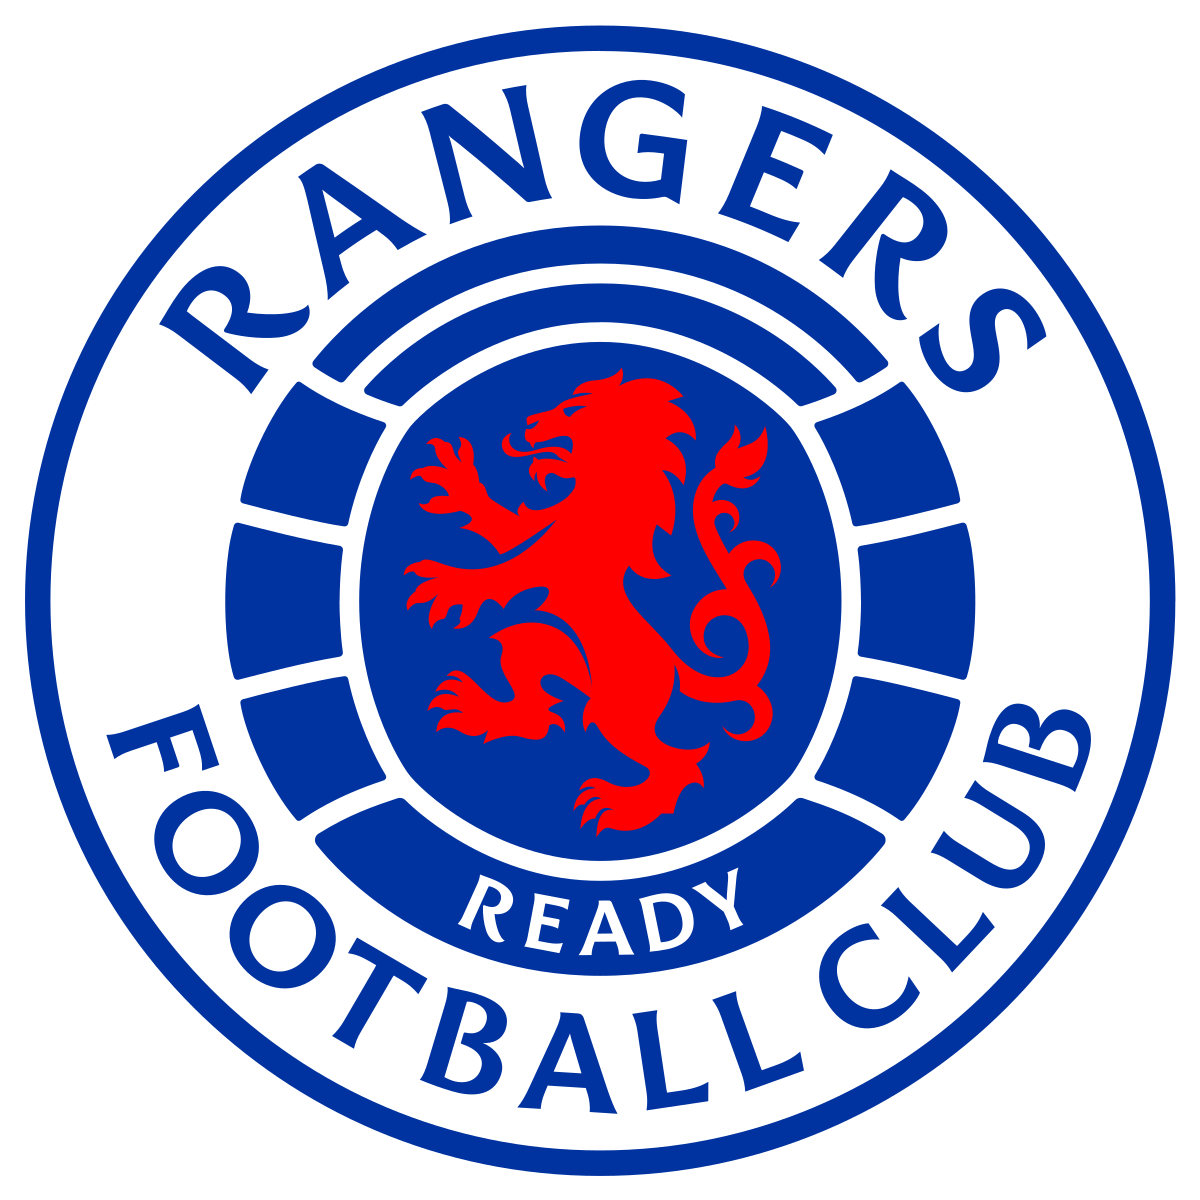 Kenny Barclay appointed finance director at Rangers